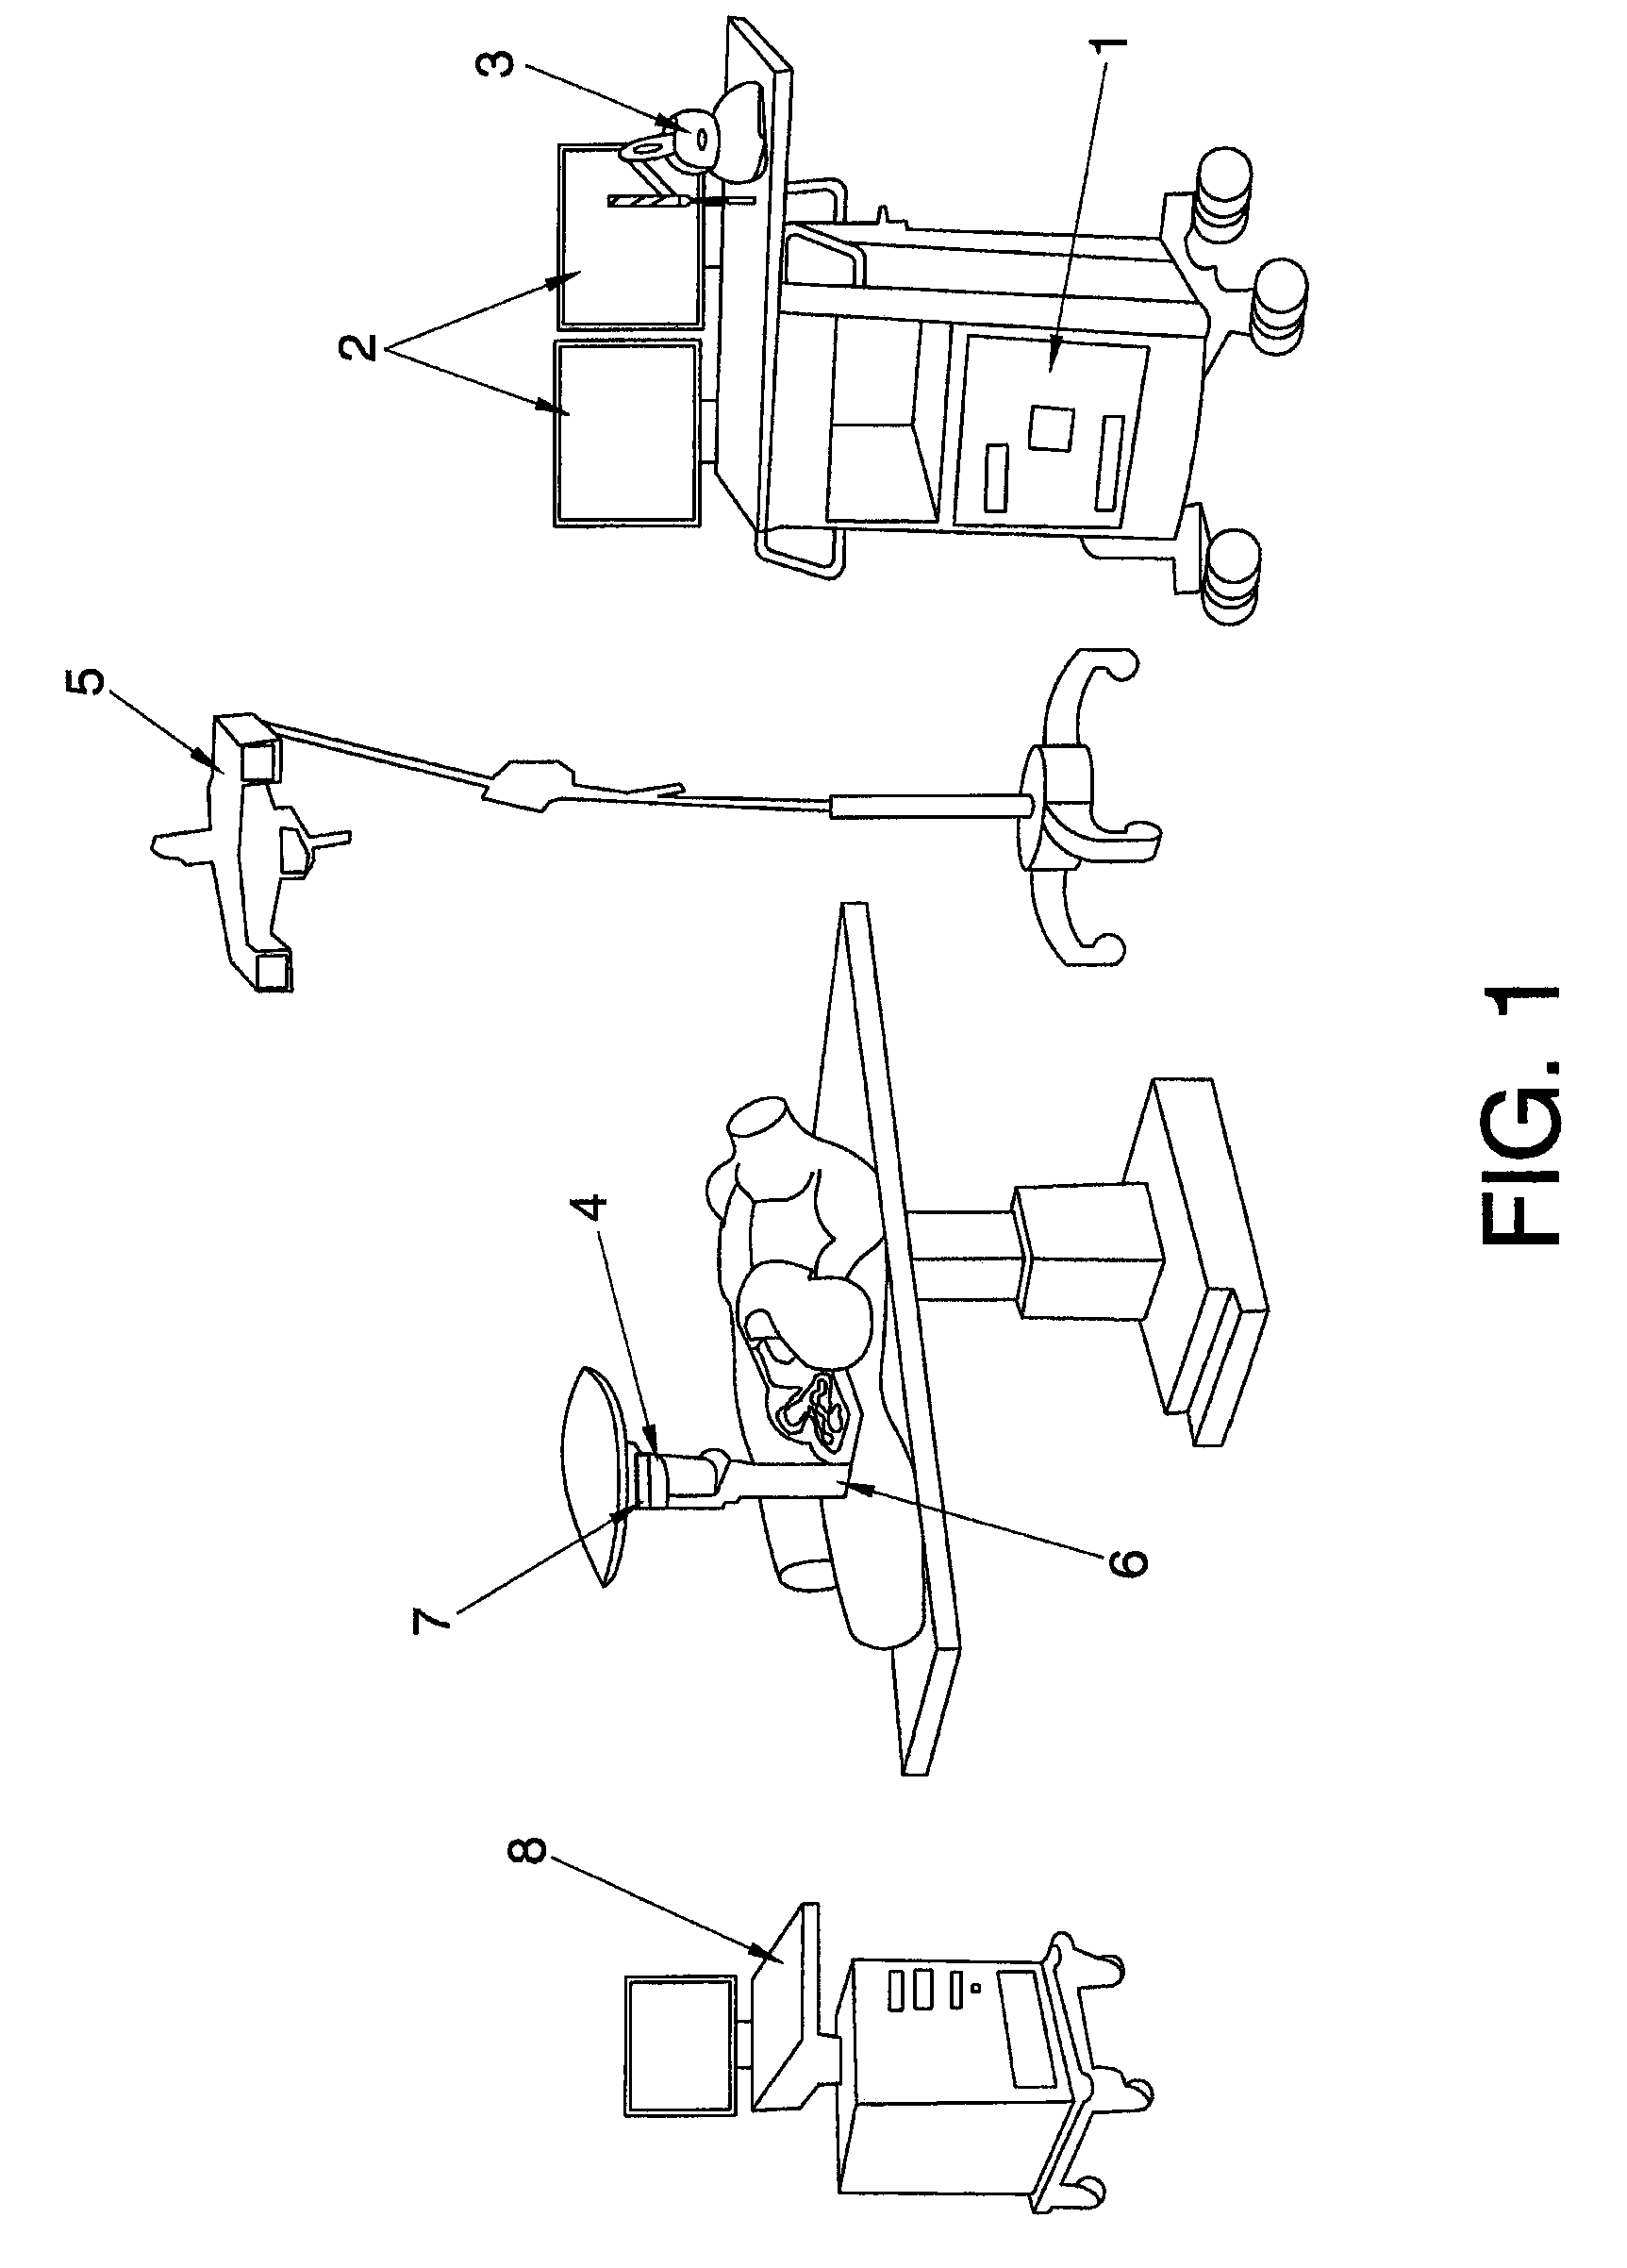 Planning system for intraoperative radiation therapy and method for carrying out said planning